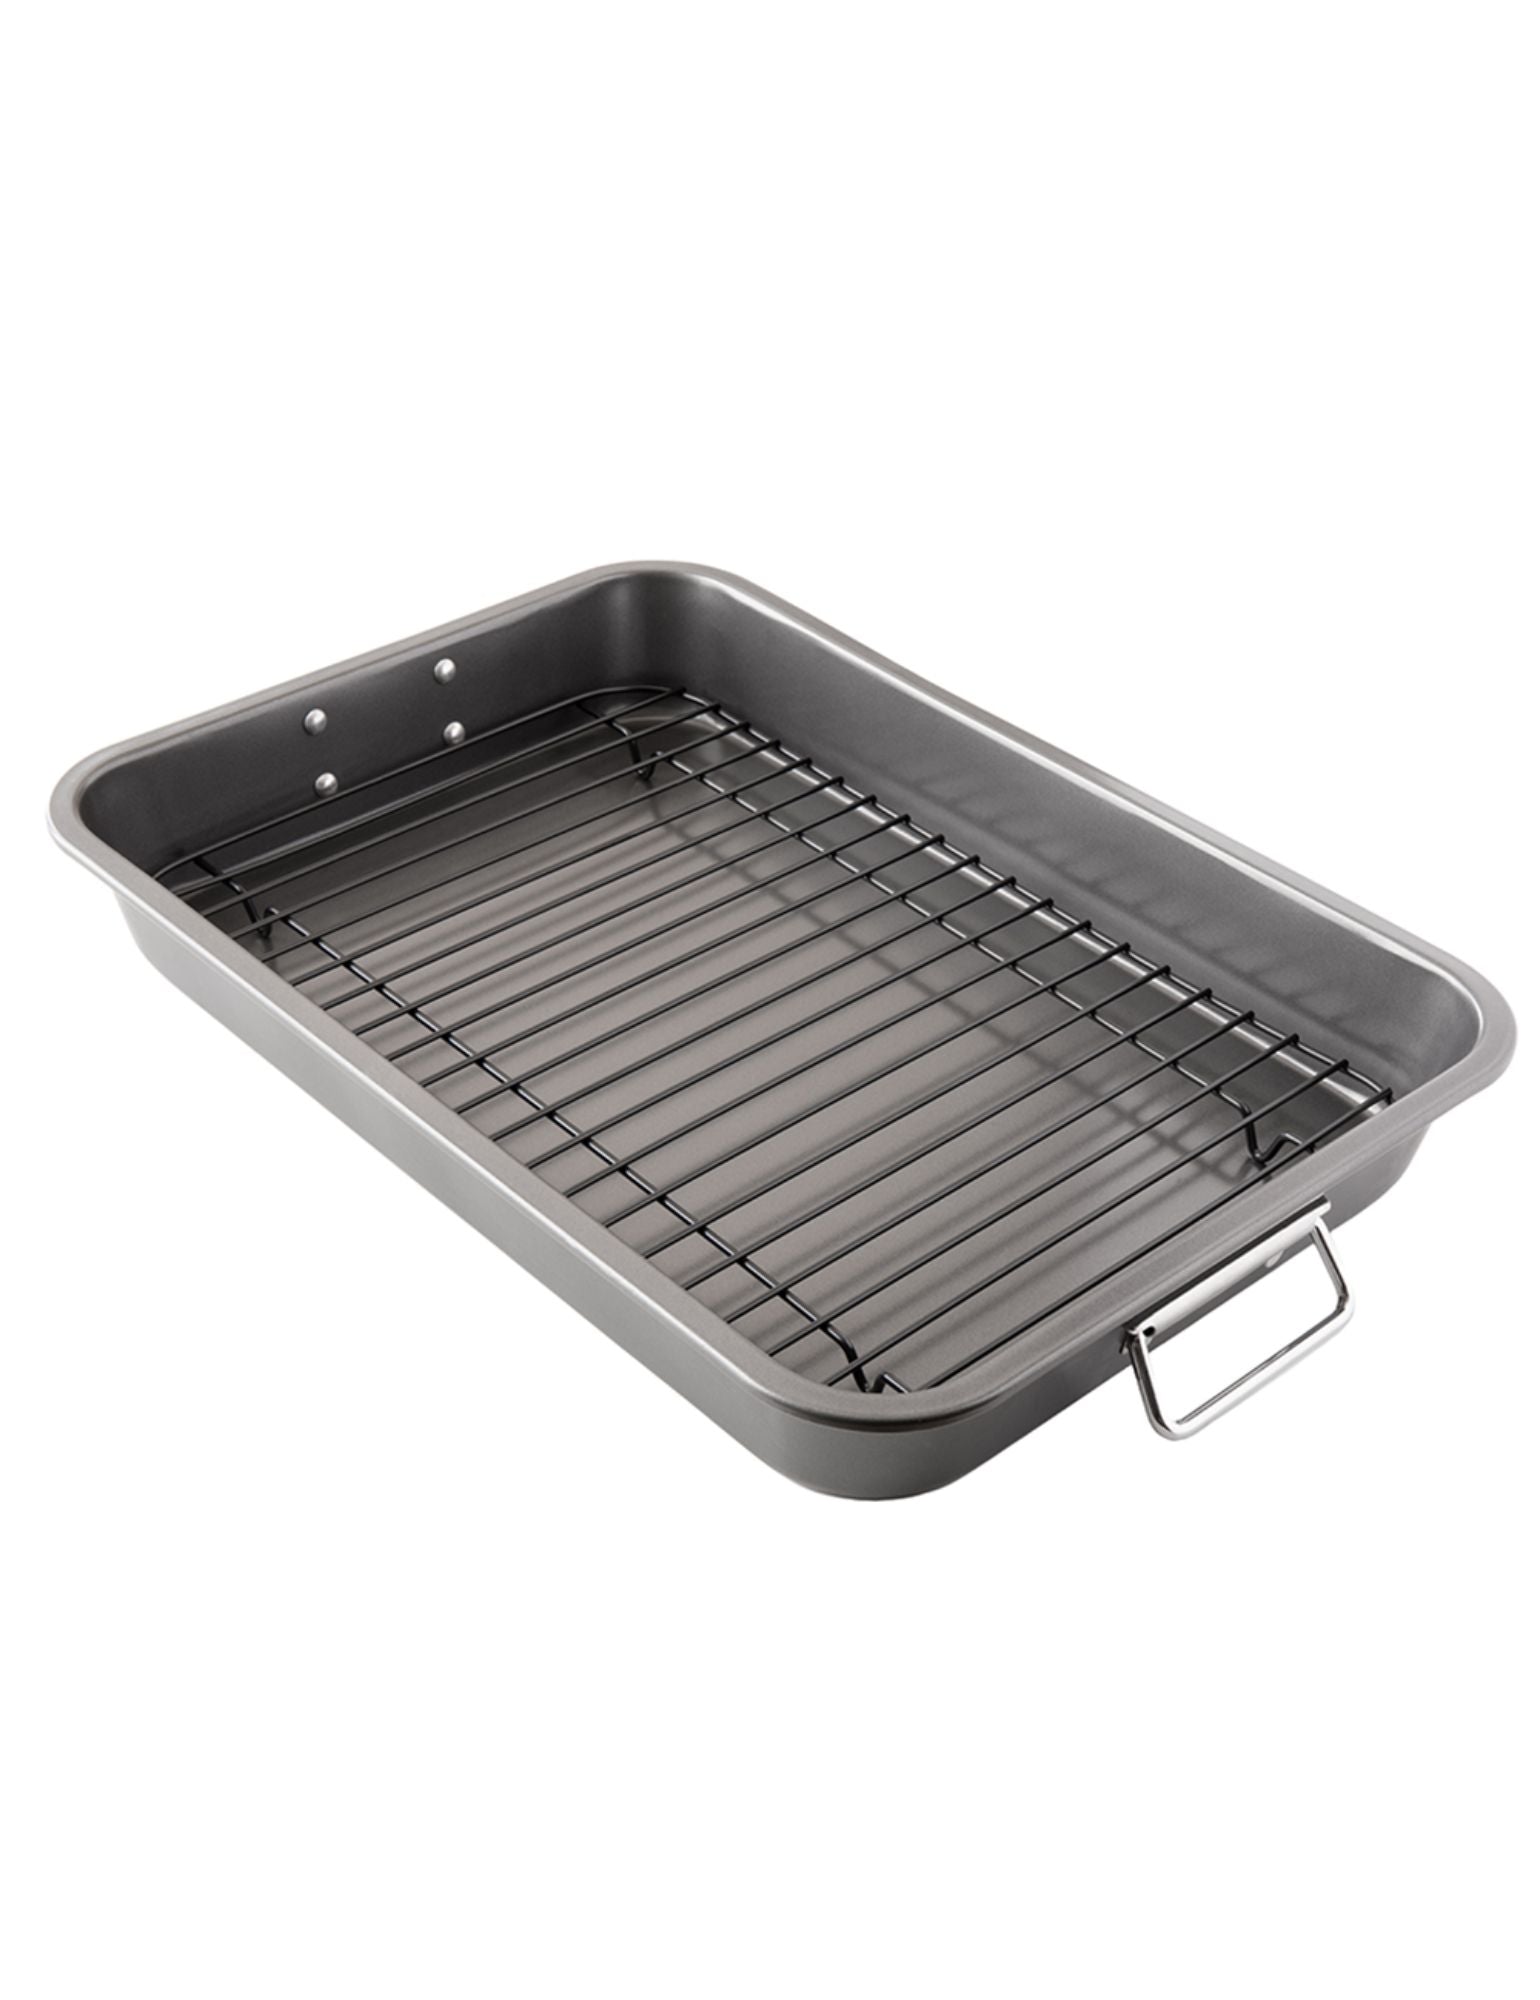 Le Creuset Large Stainless Steel Roasting Pan w/Nonstick Rack